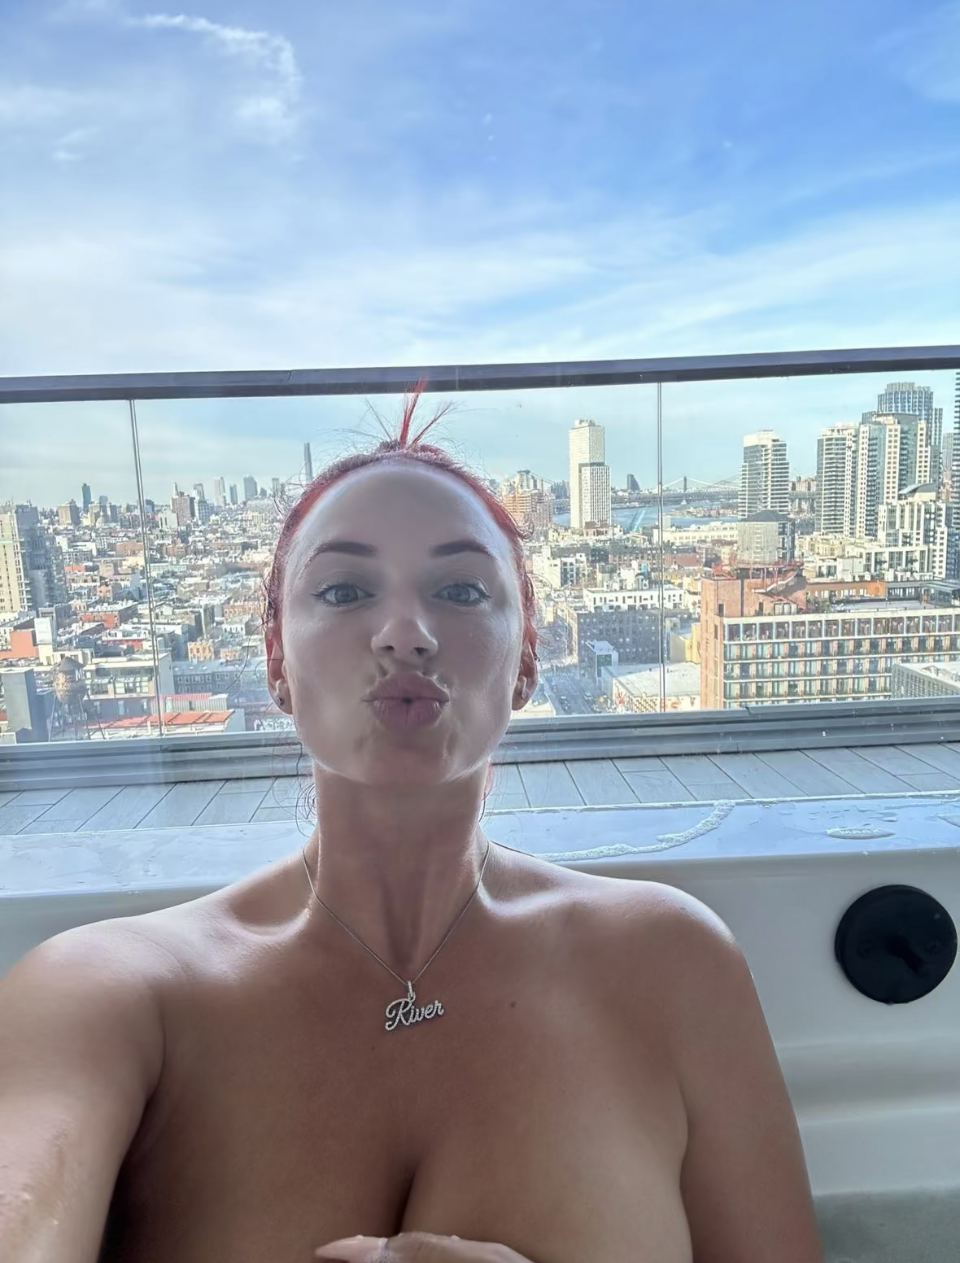 Setting the Record Straight: YesJulz Says She Has Never Hooked Up With LeBron James! - Photo 4